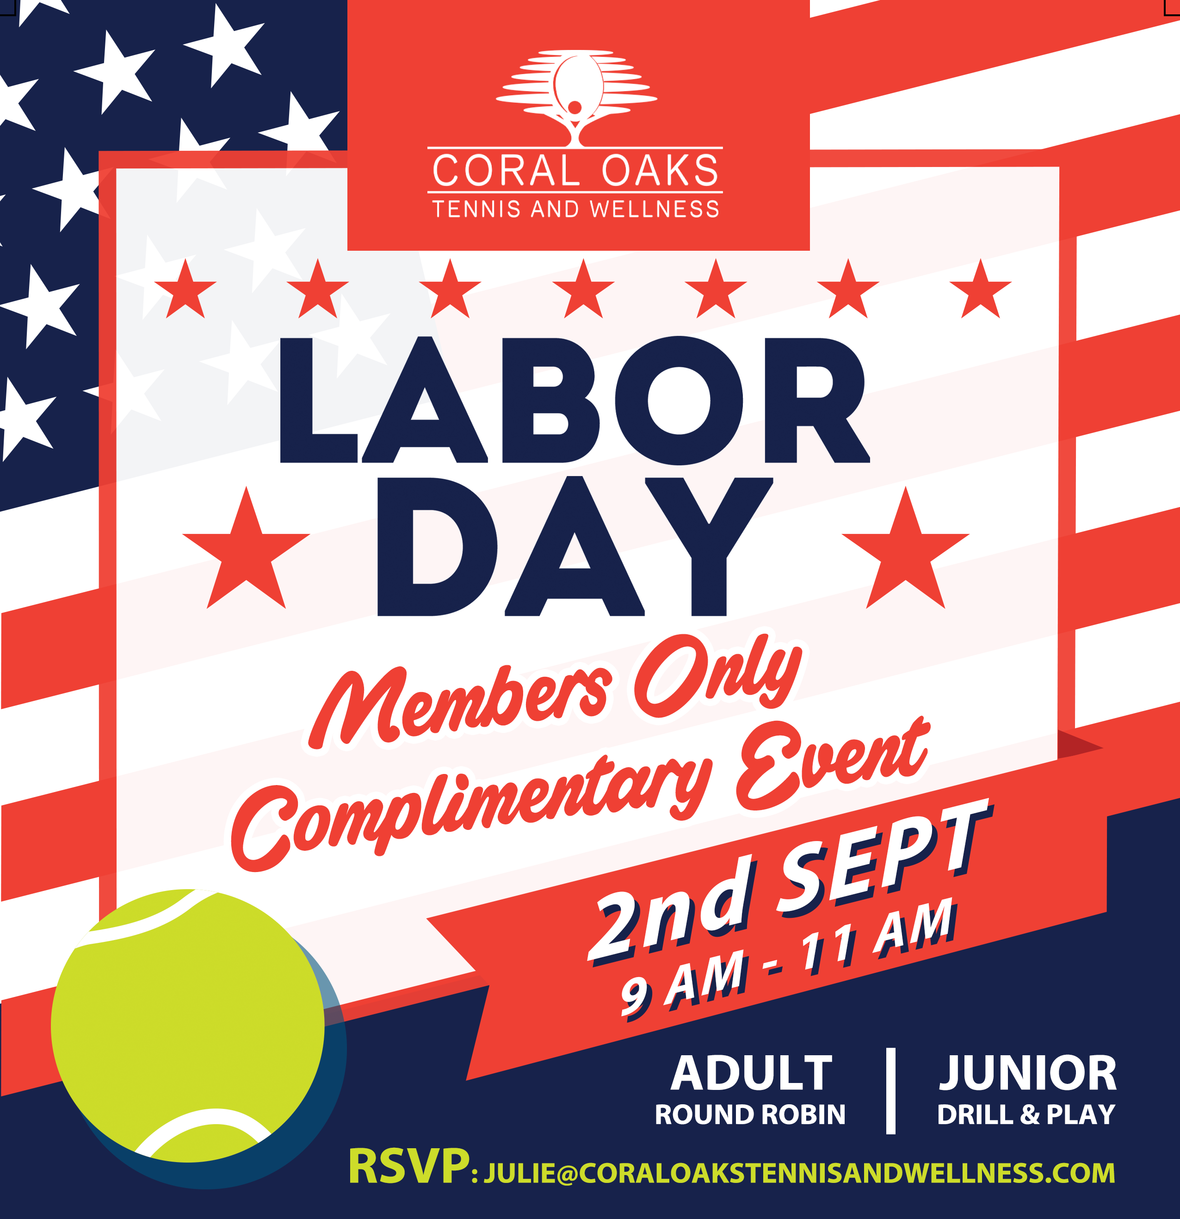 Labor Day Event – Members Only